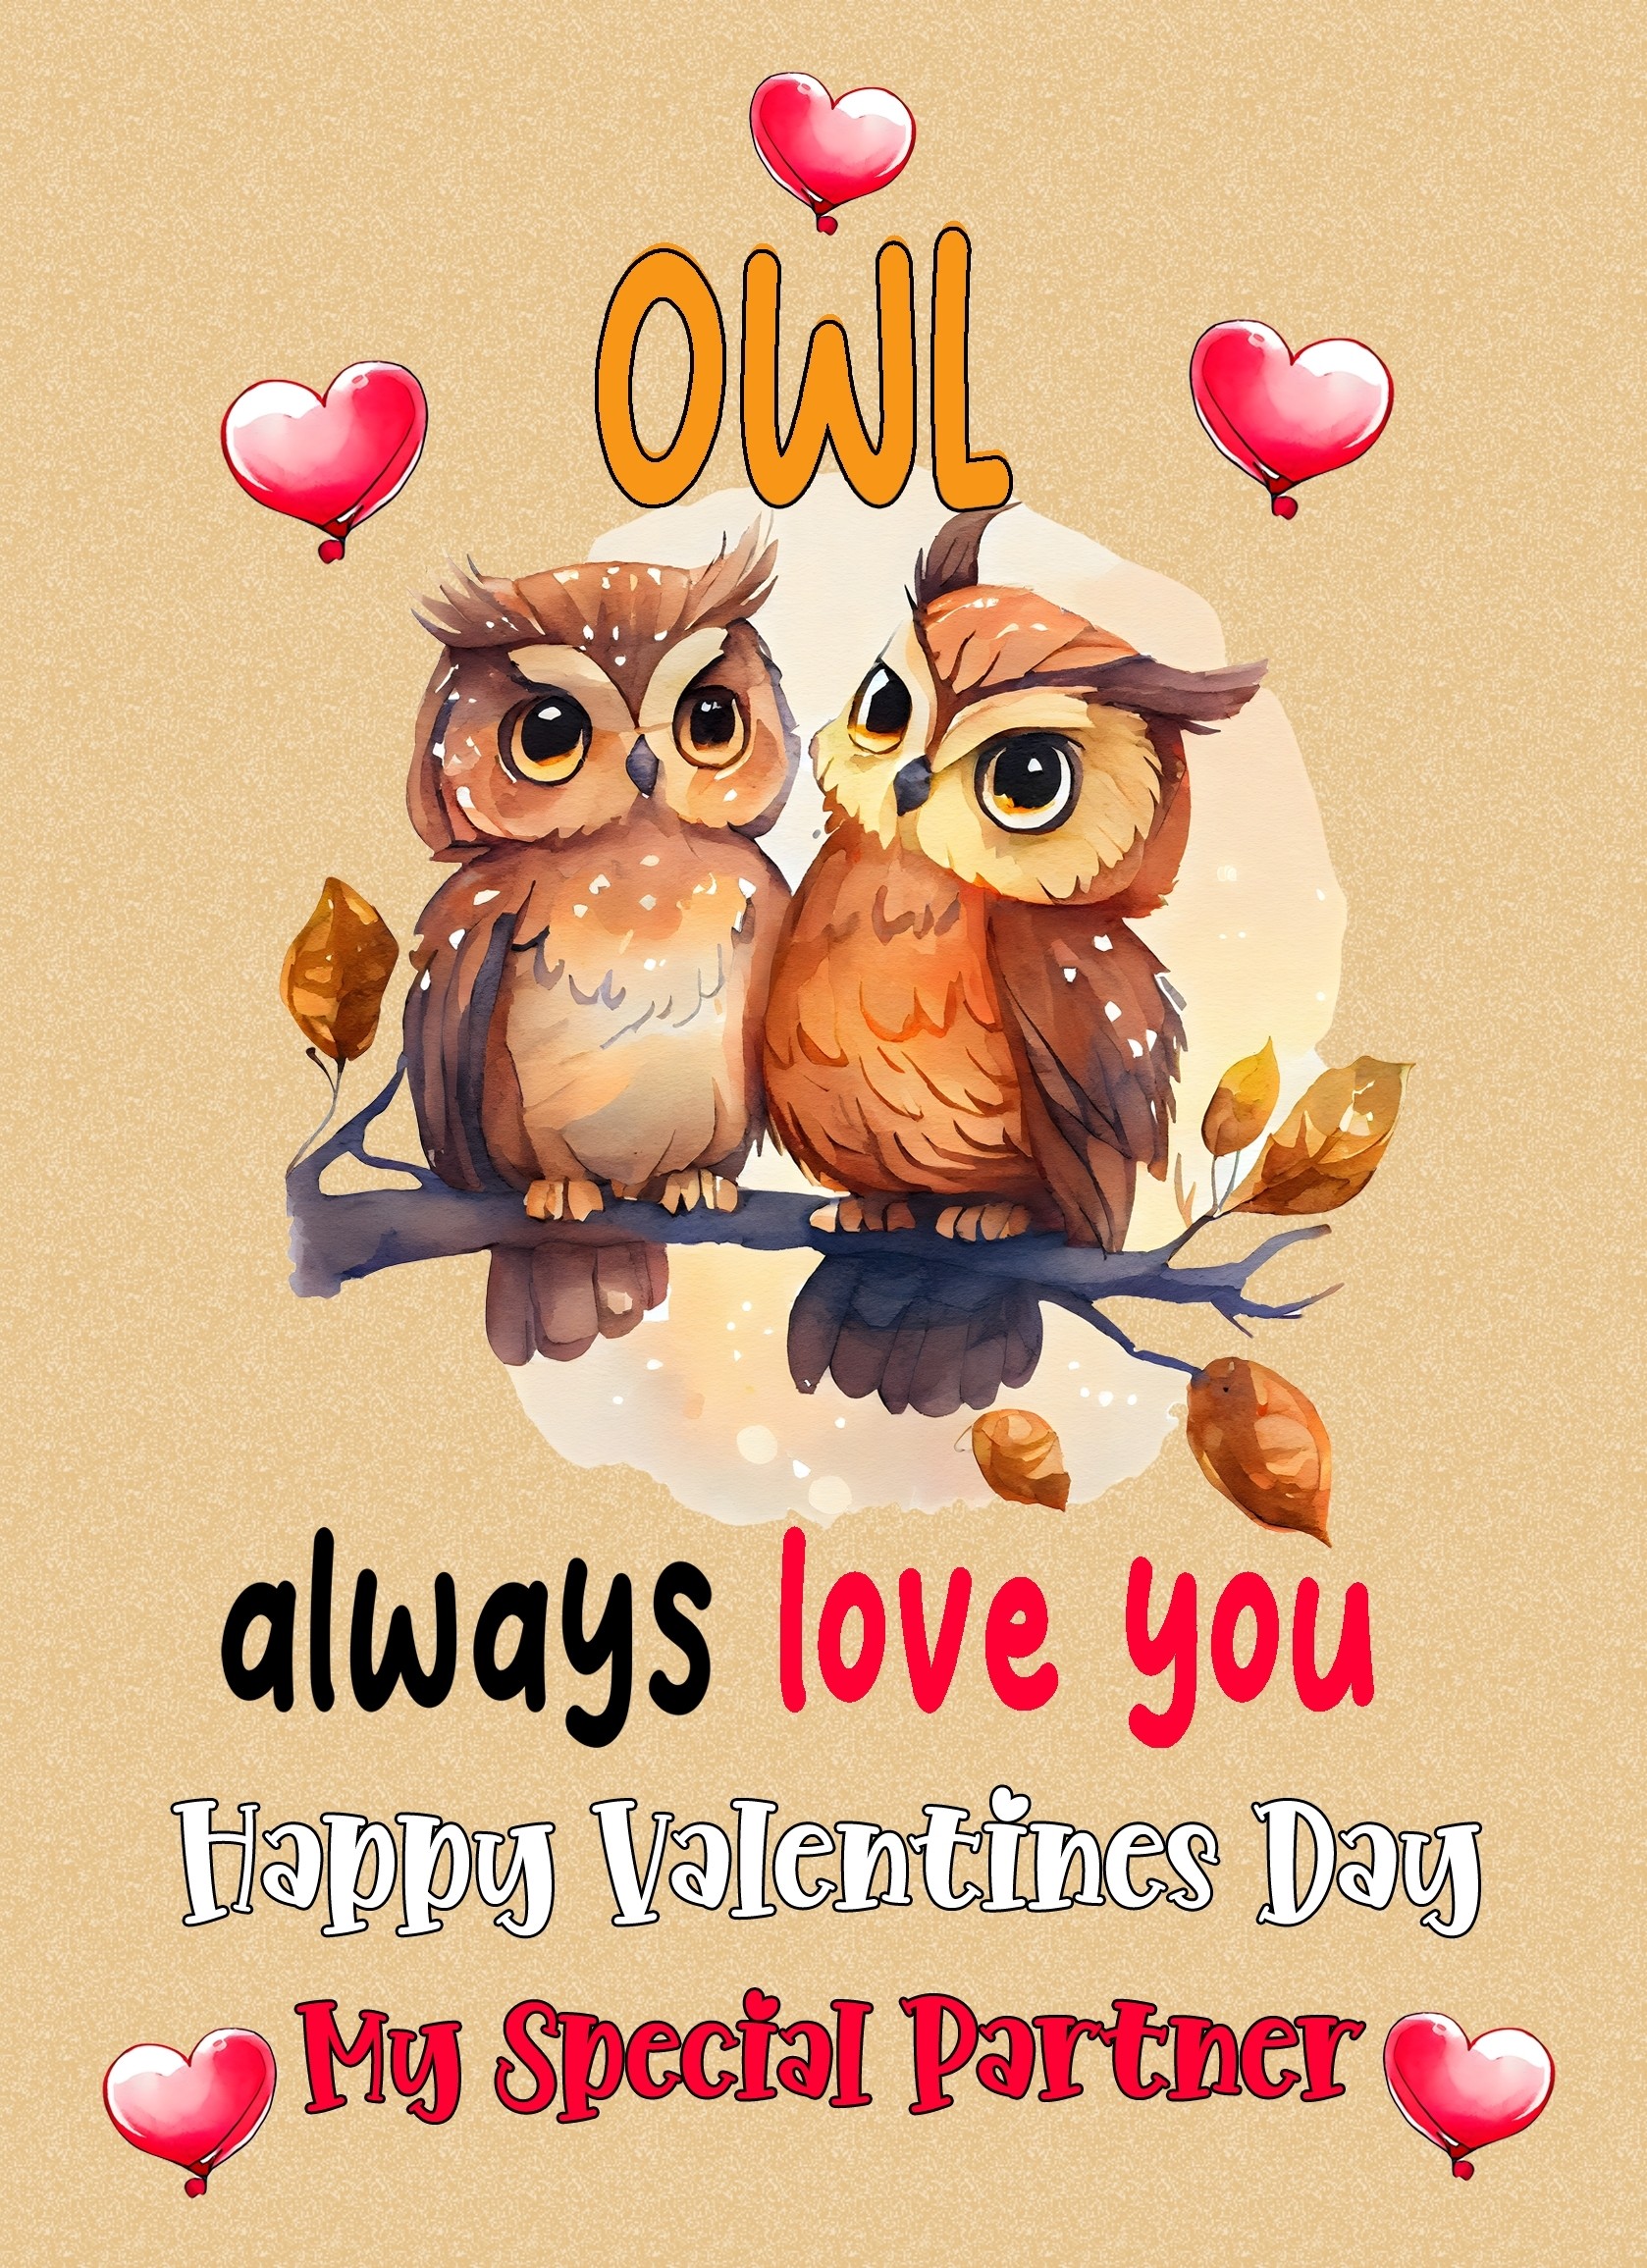 Funny Pun Valentines Day Card for Partner (Owl Always Love You)